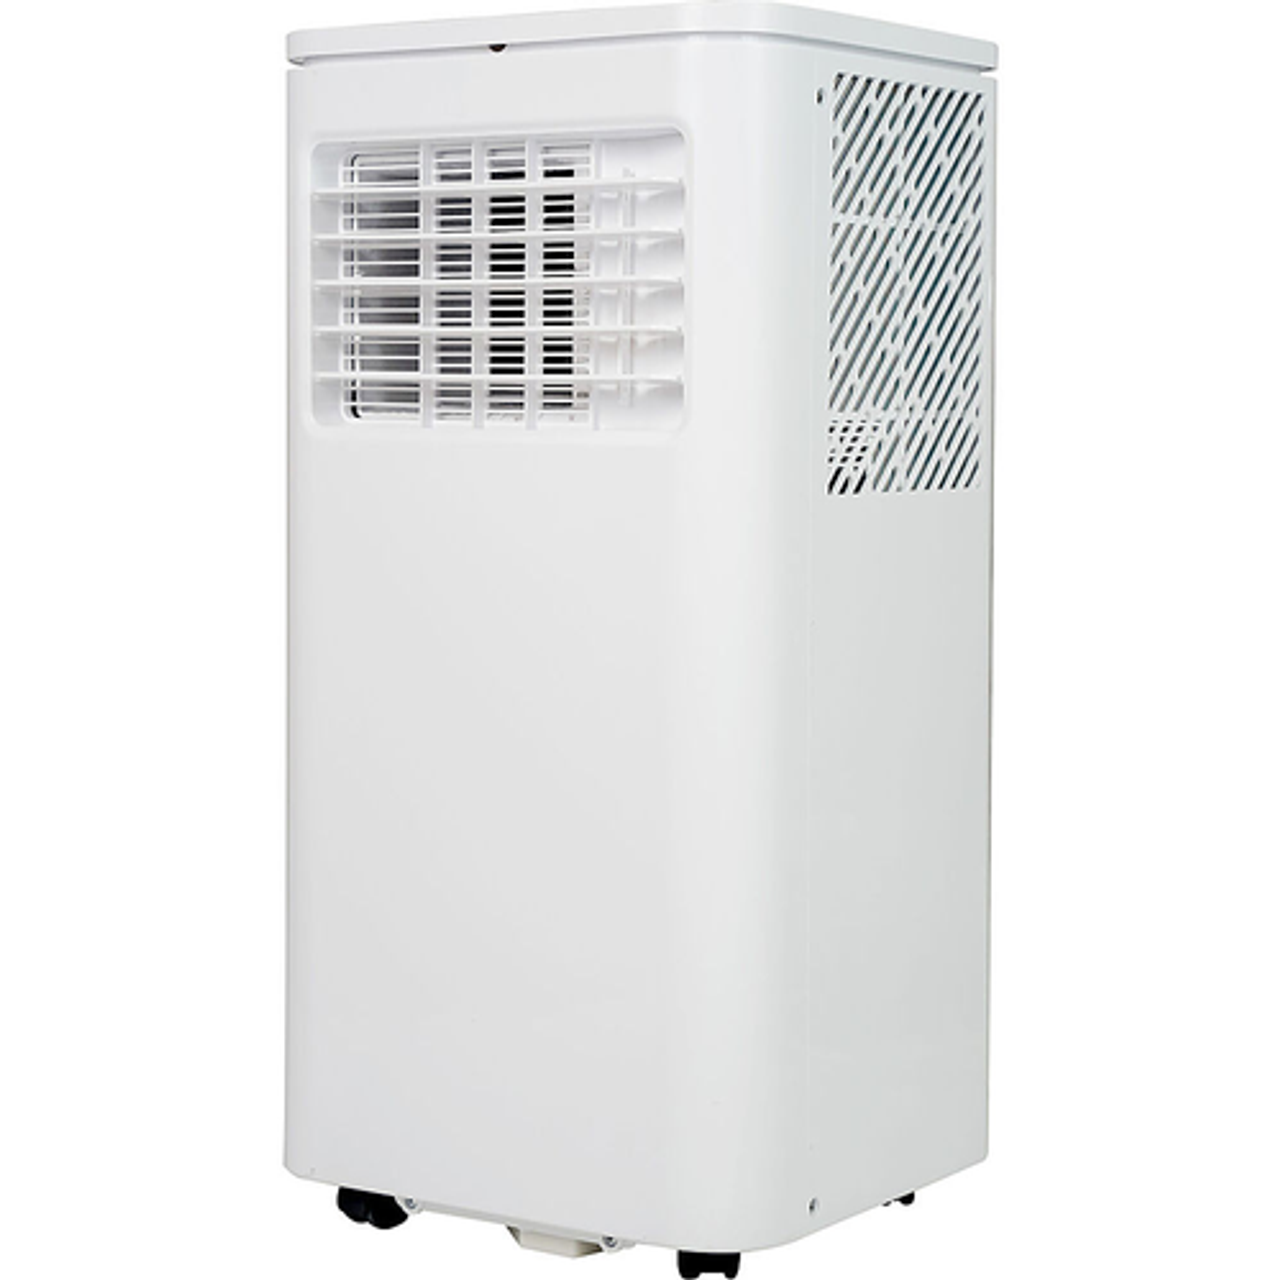 AireMax - 300 Sq. Ft. Portable Air Conditioner with Dehumidifier - White